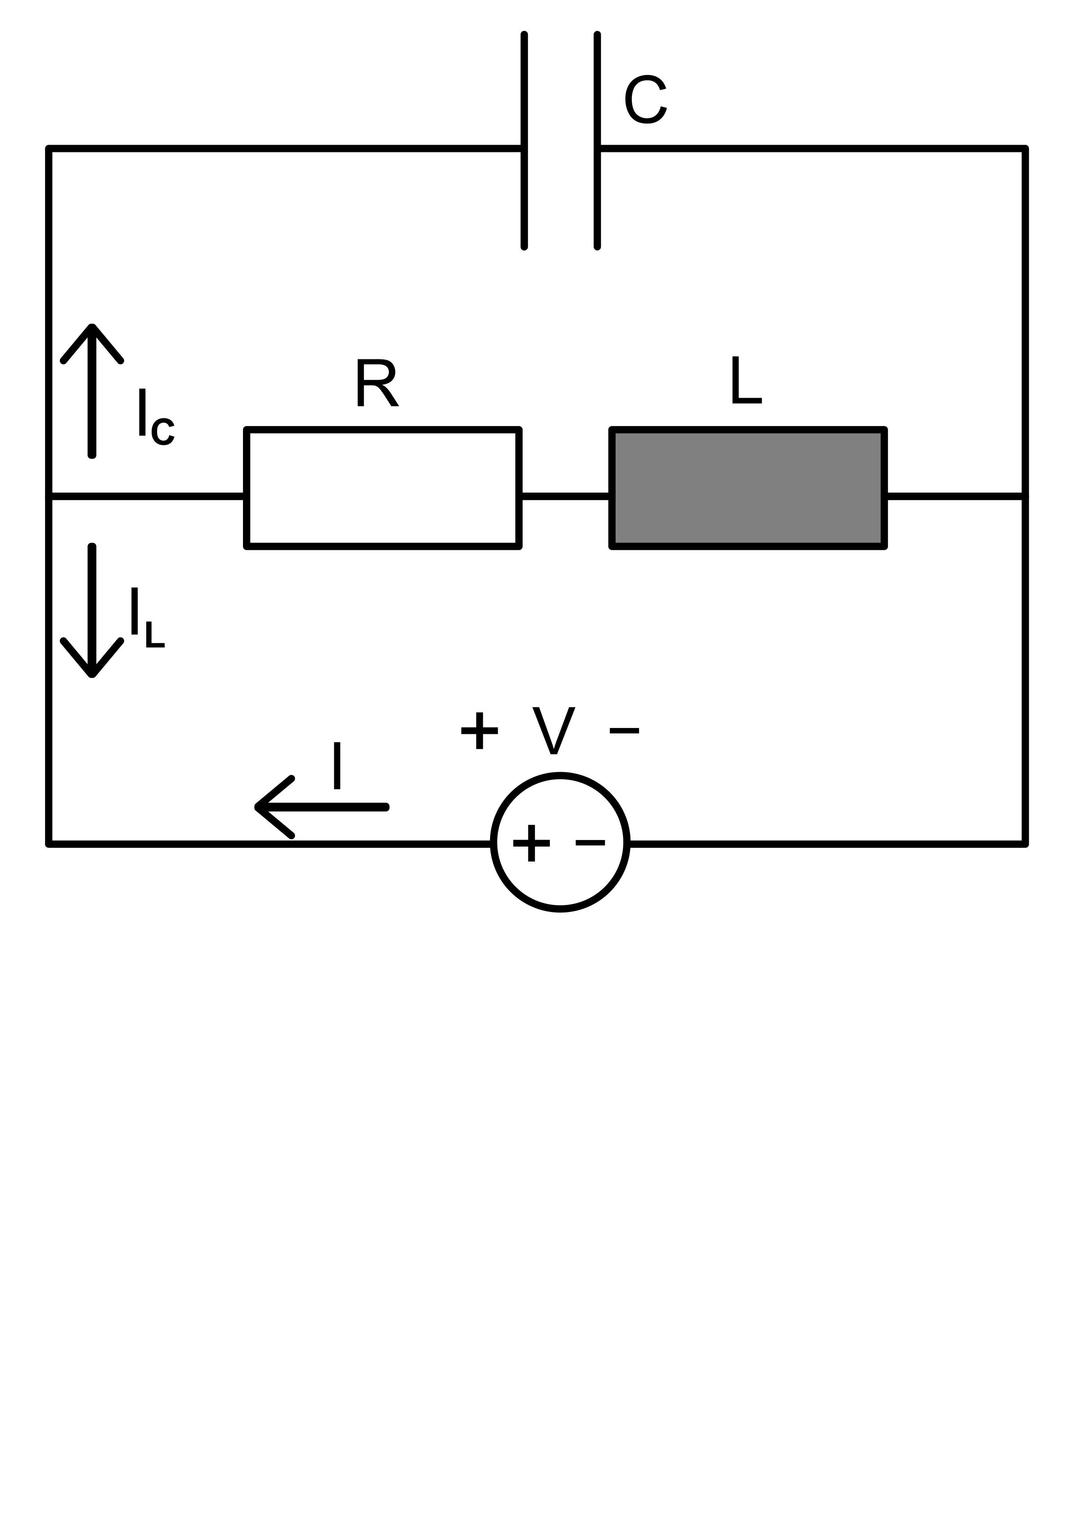 Simple hybrid (not parallel nor serial) electric circuit png transparent